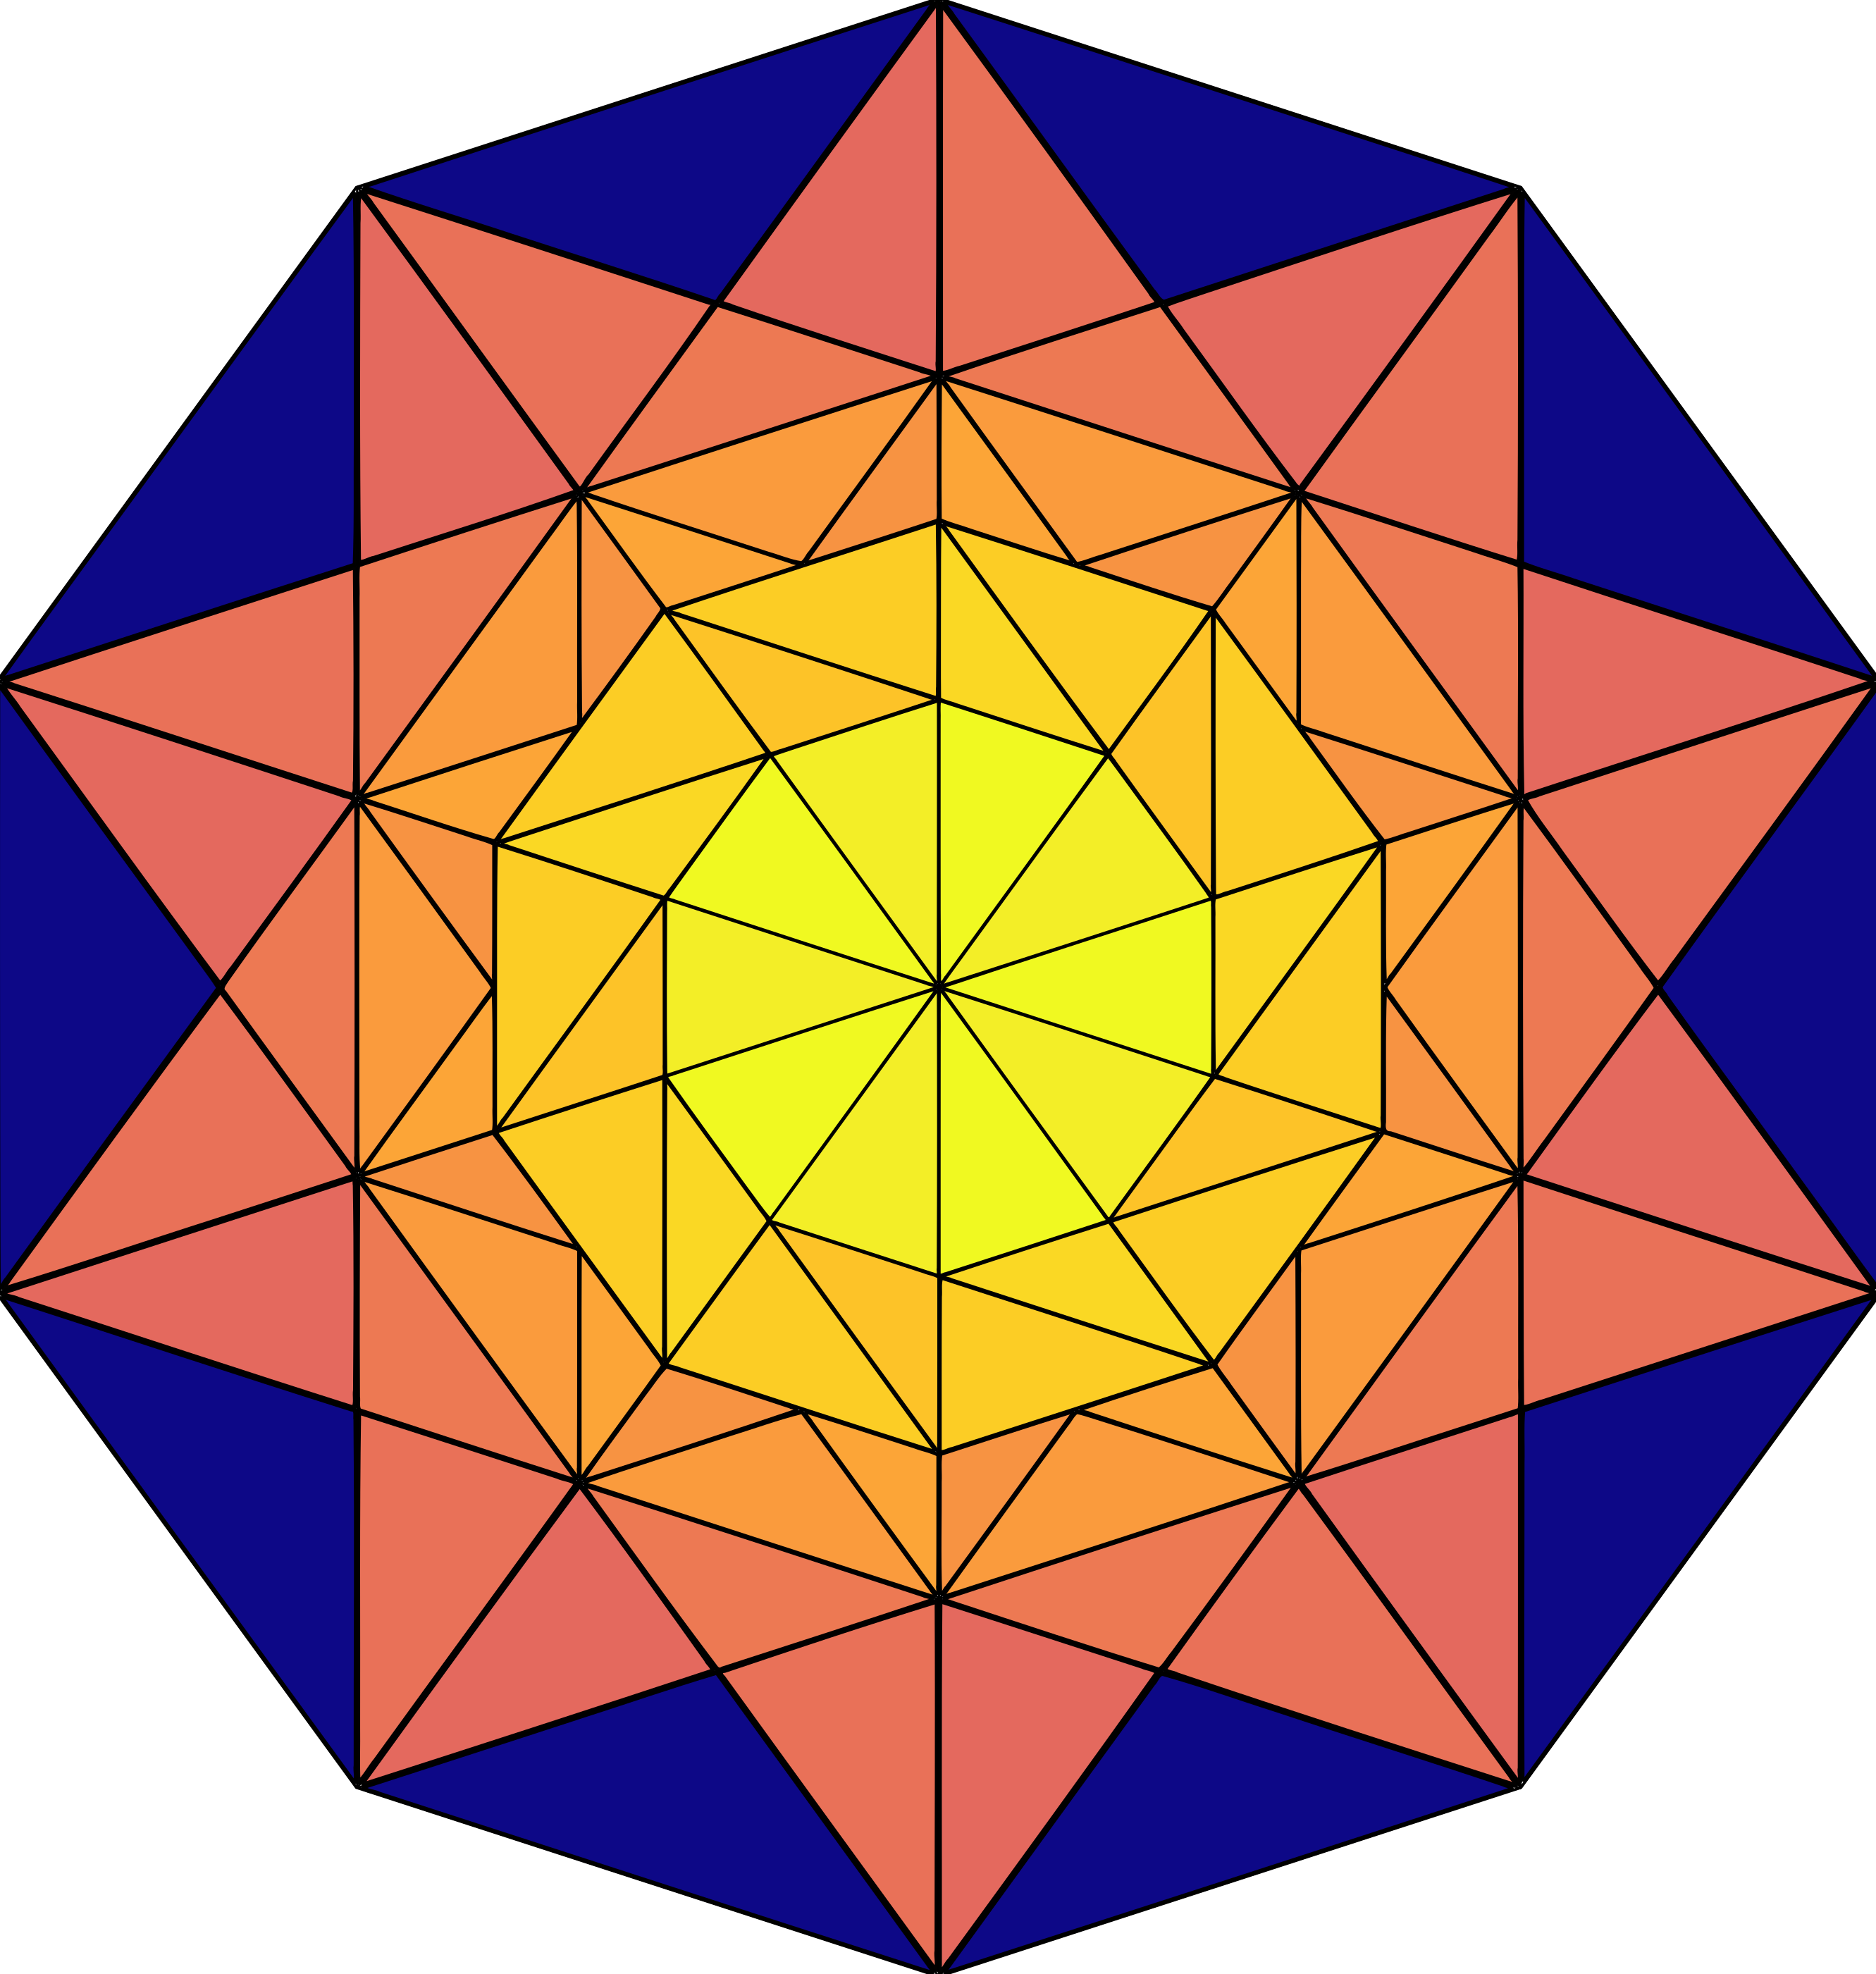 10-point star made up of 100 triangles